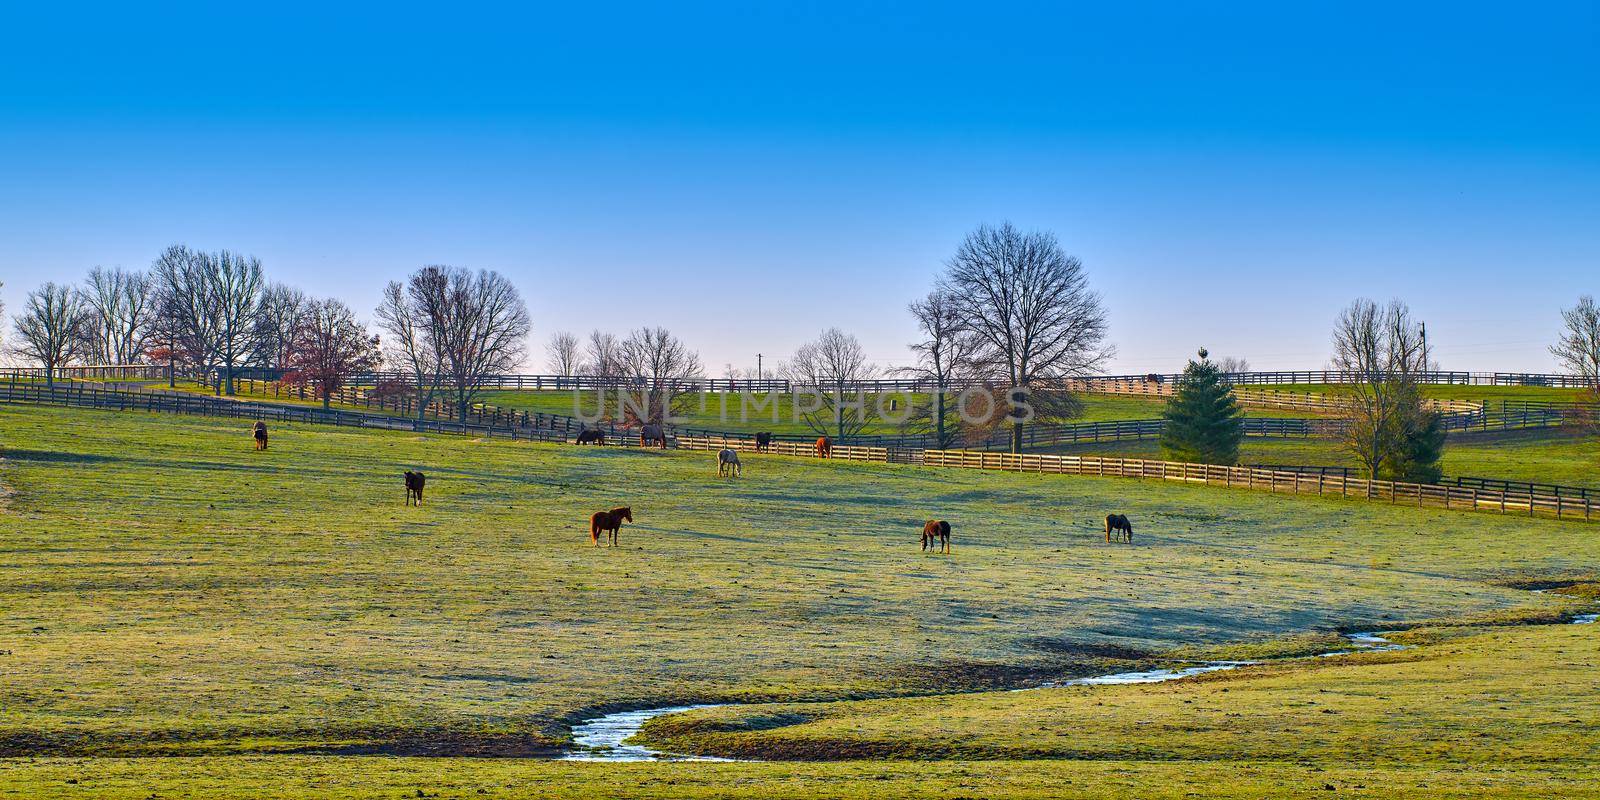 Group of thoroughbred horses grazing in a field.